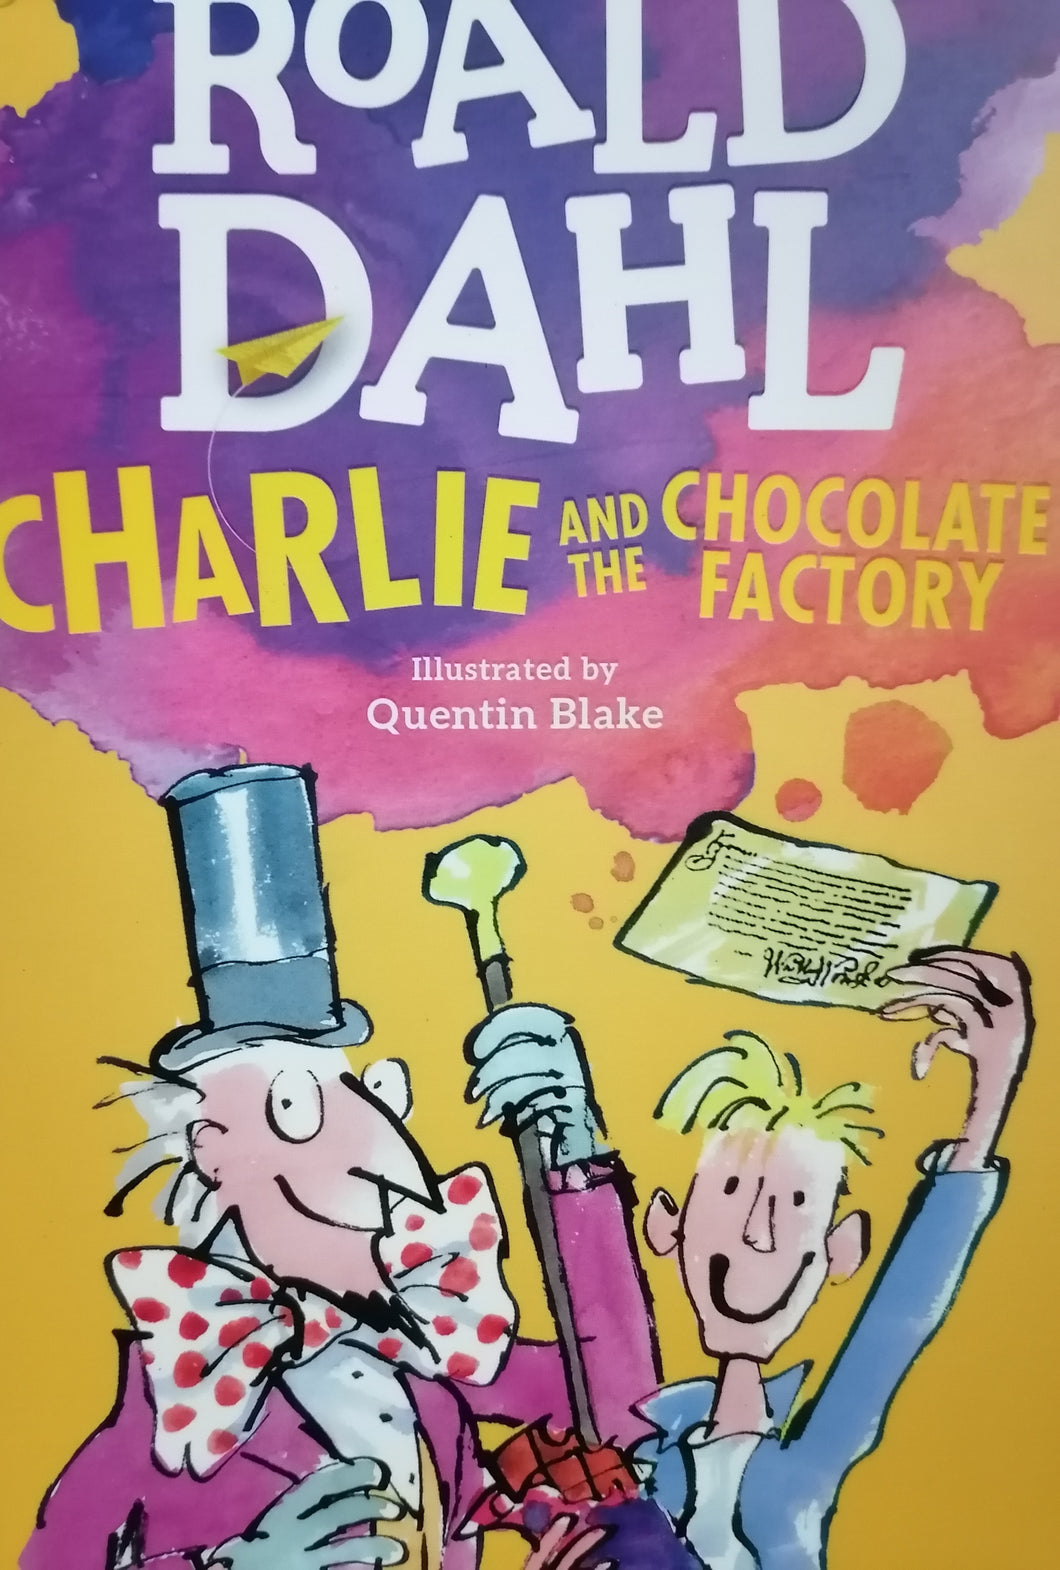 Charlie and the chocolate factory By Roald Dahl